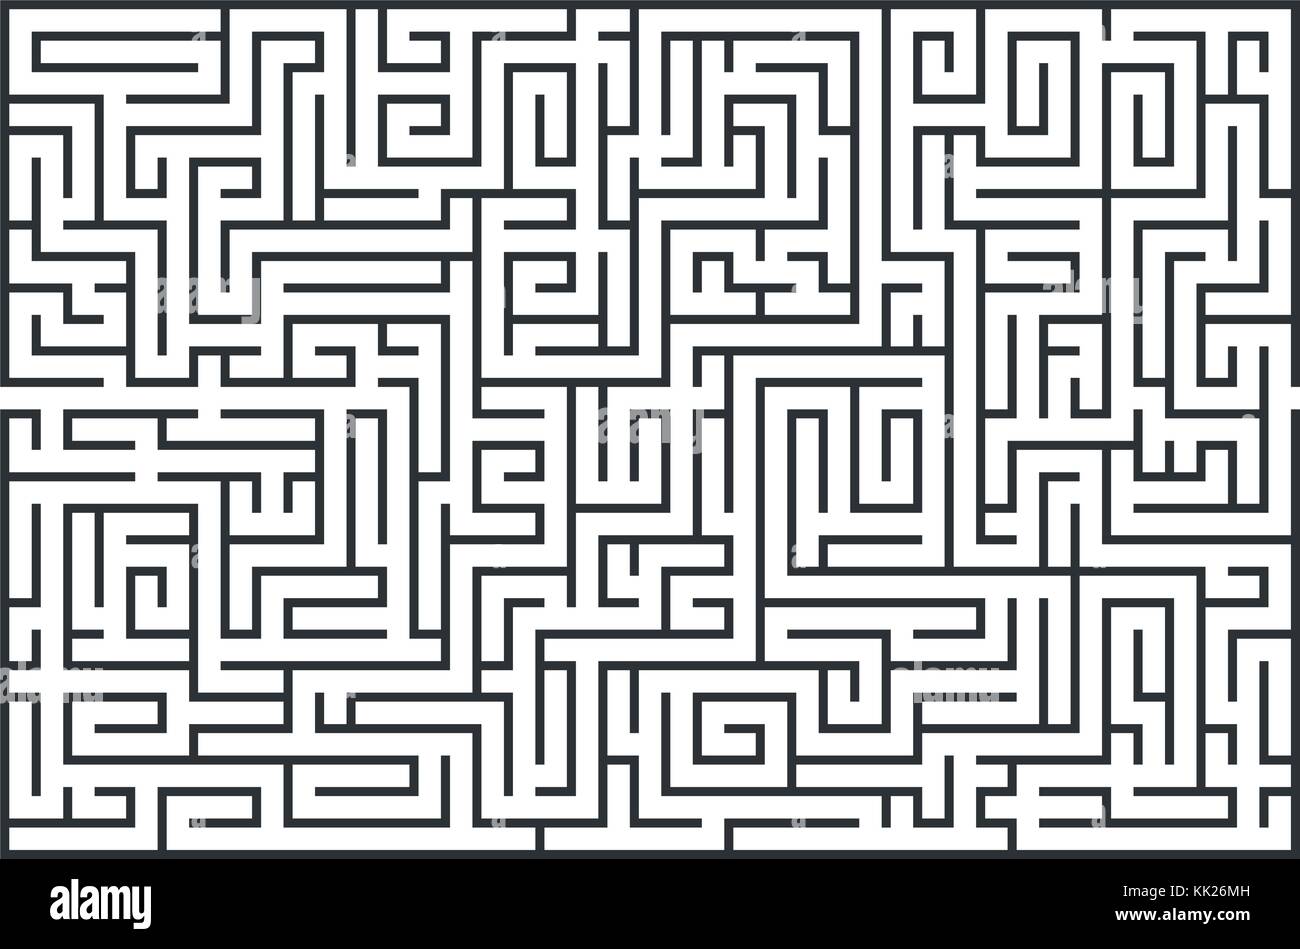 illustration of maze, labrinth. Isolated on white background. Medium difficulty. Stock Vector